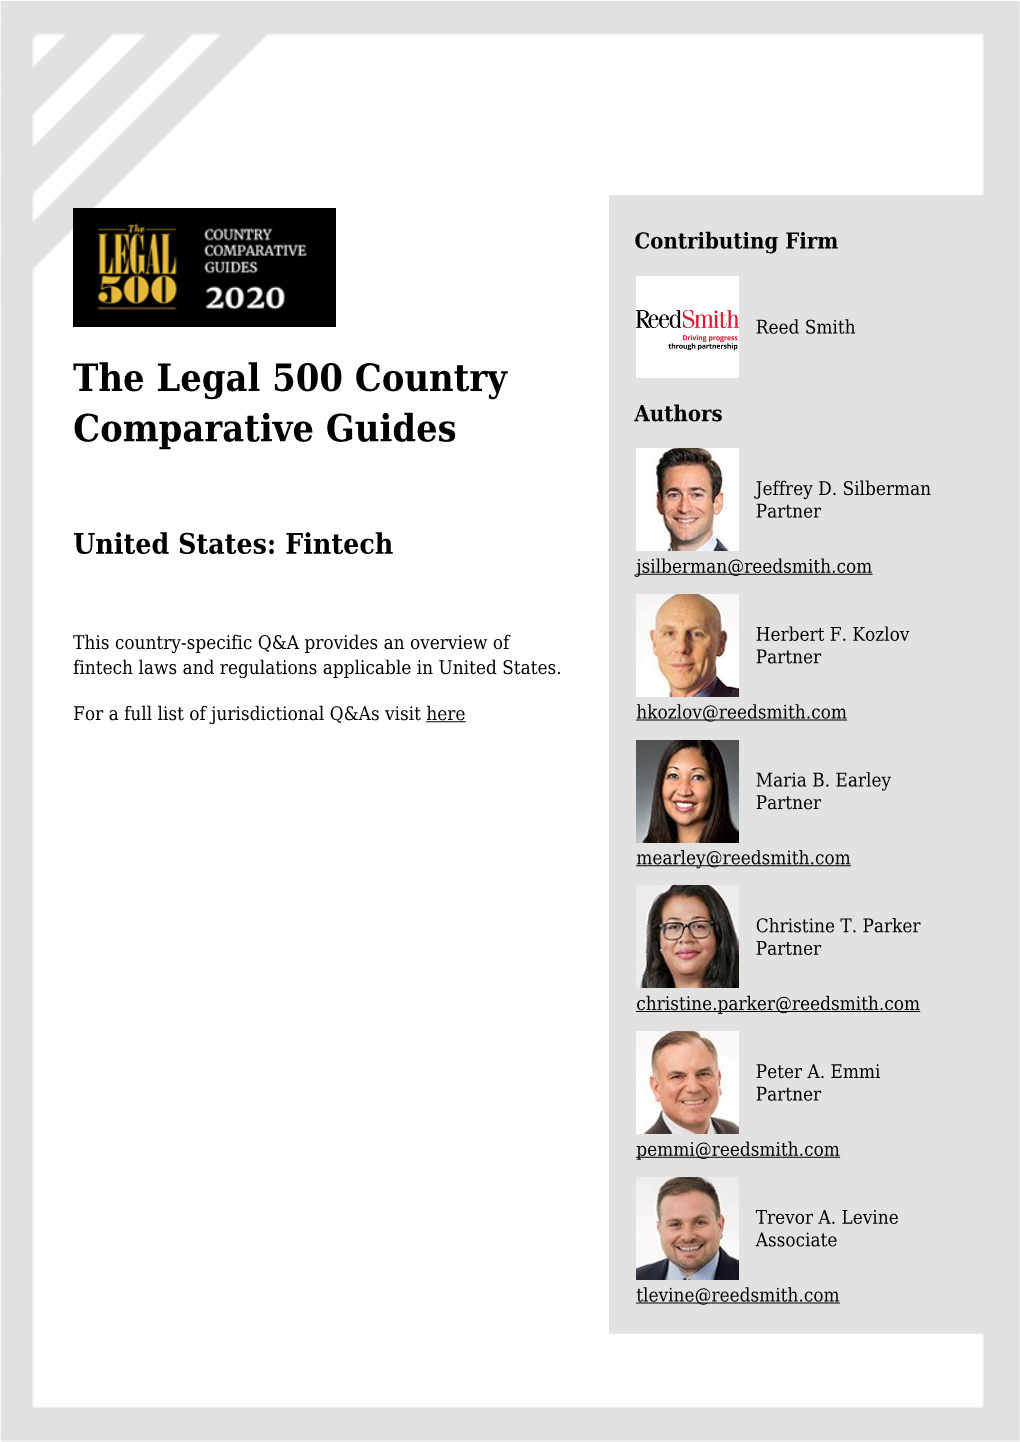 The Legal 500 Comparative Guide